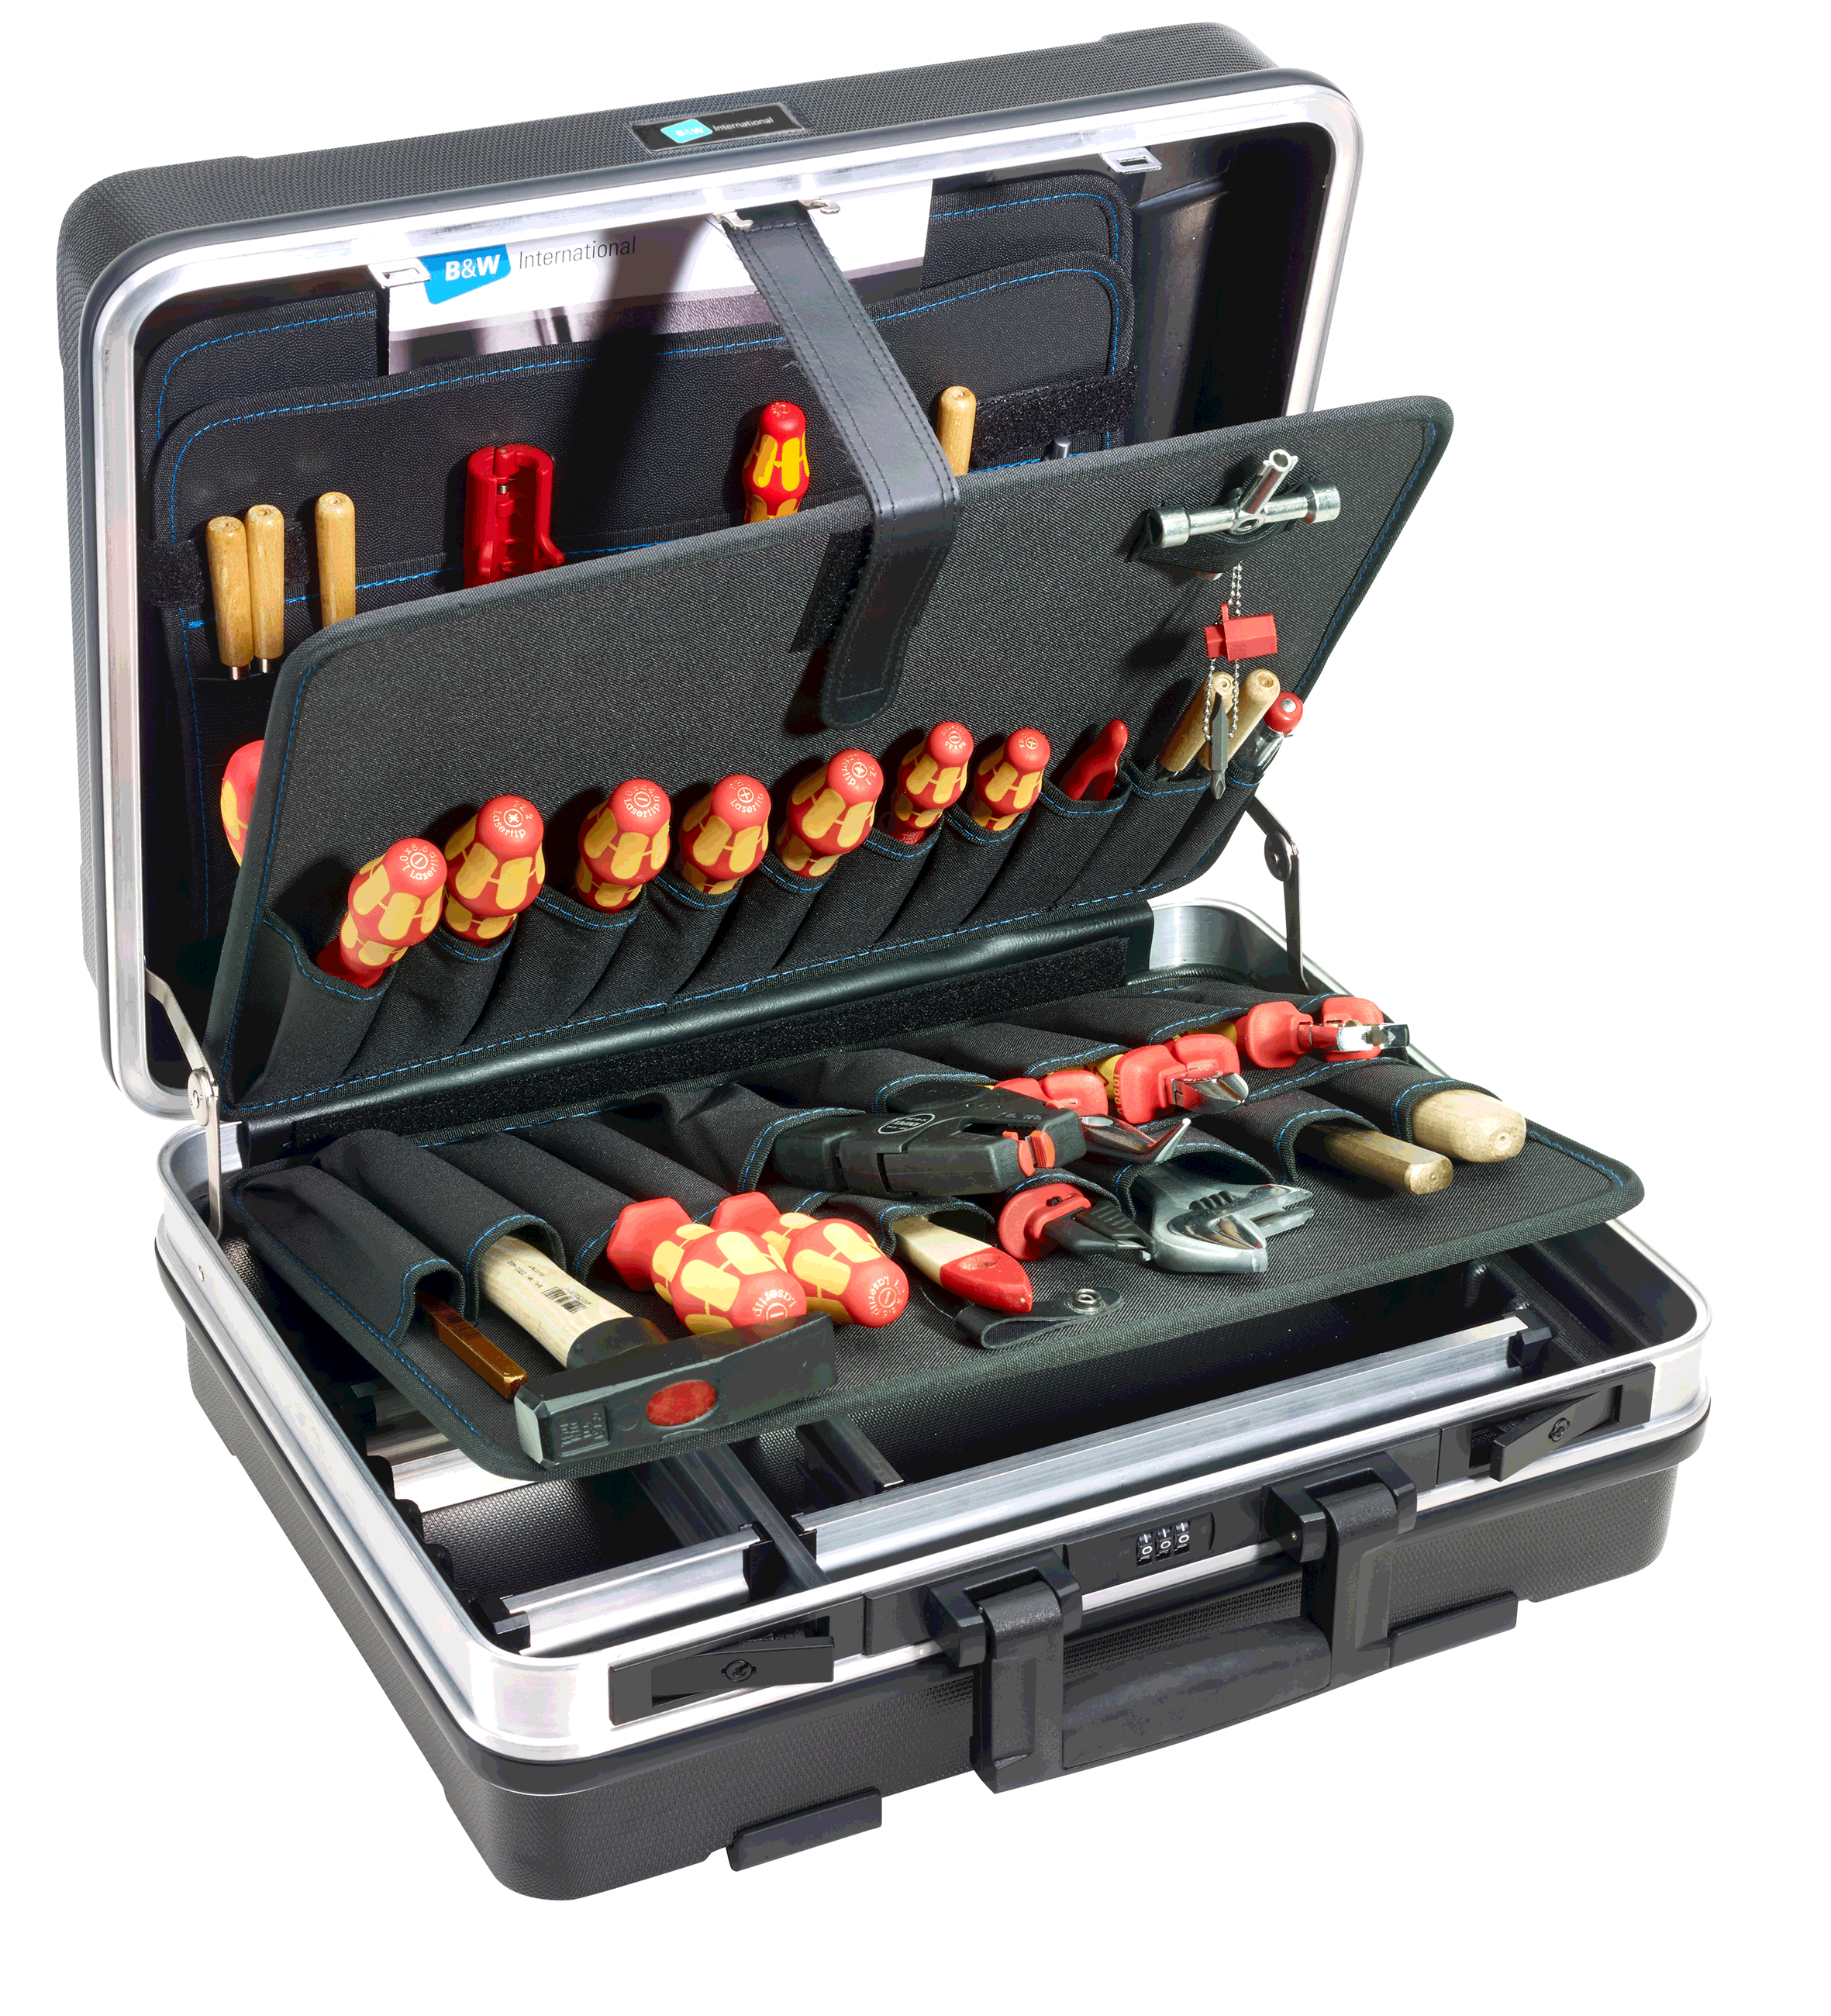 Briefcase Style Hard Tool Case 120.02/P